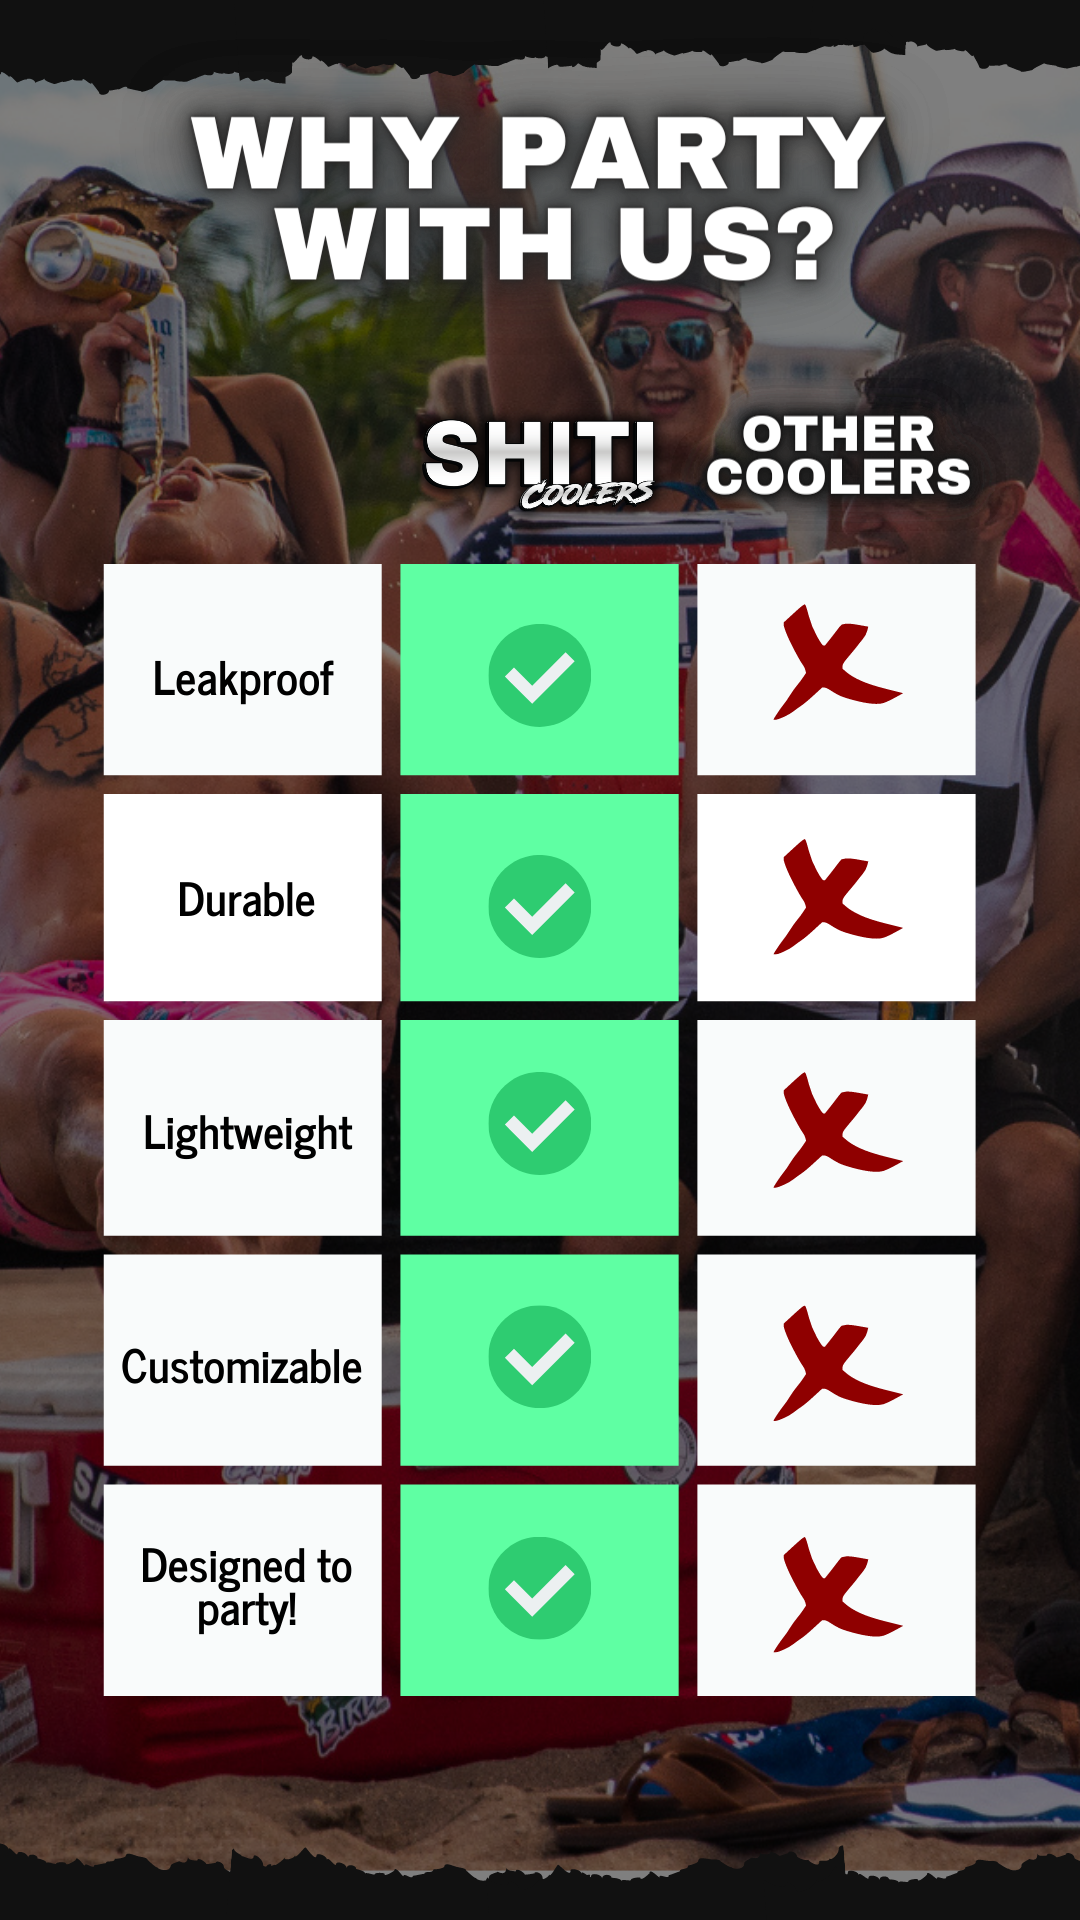 SHITI Coolers are leakproof, durable, lightweight, customizable, and designed to party!